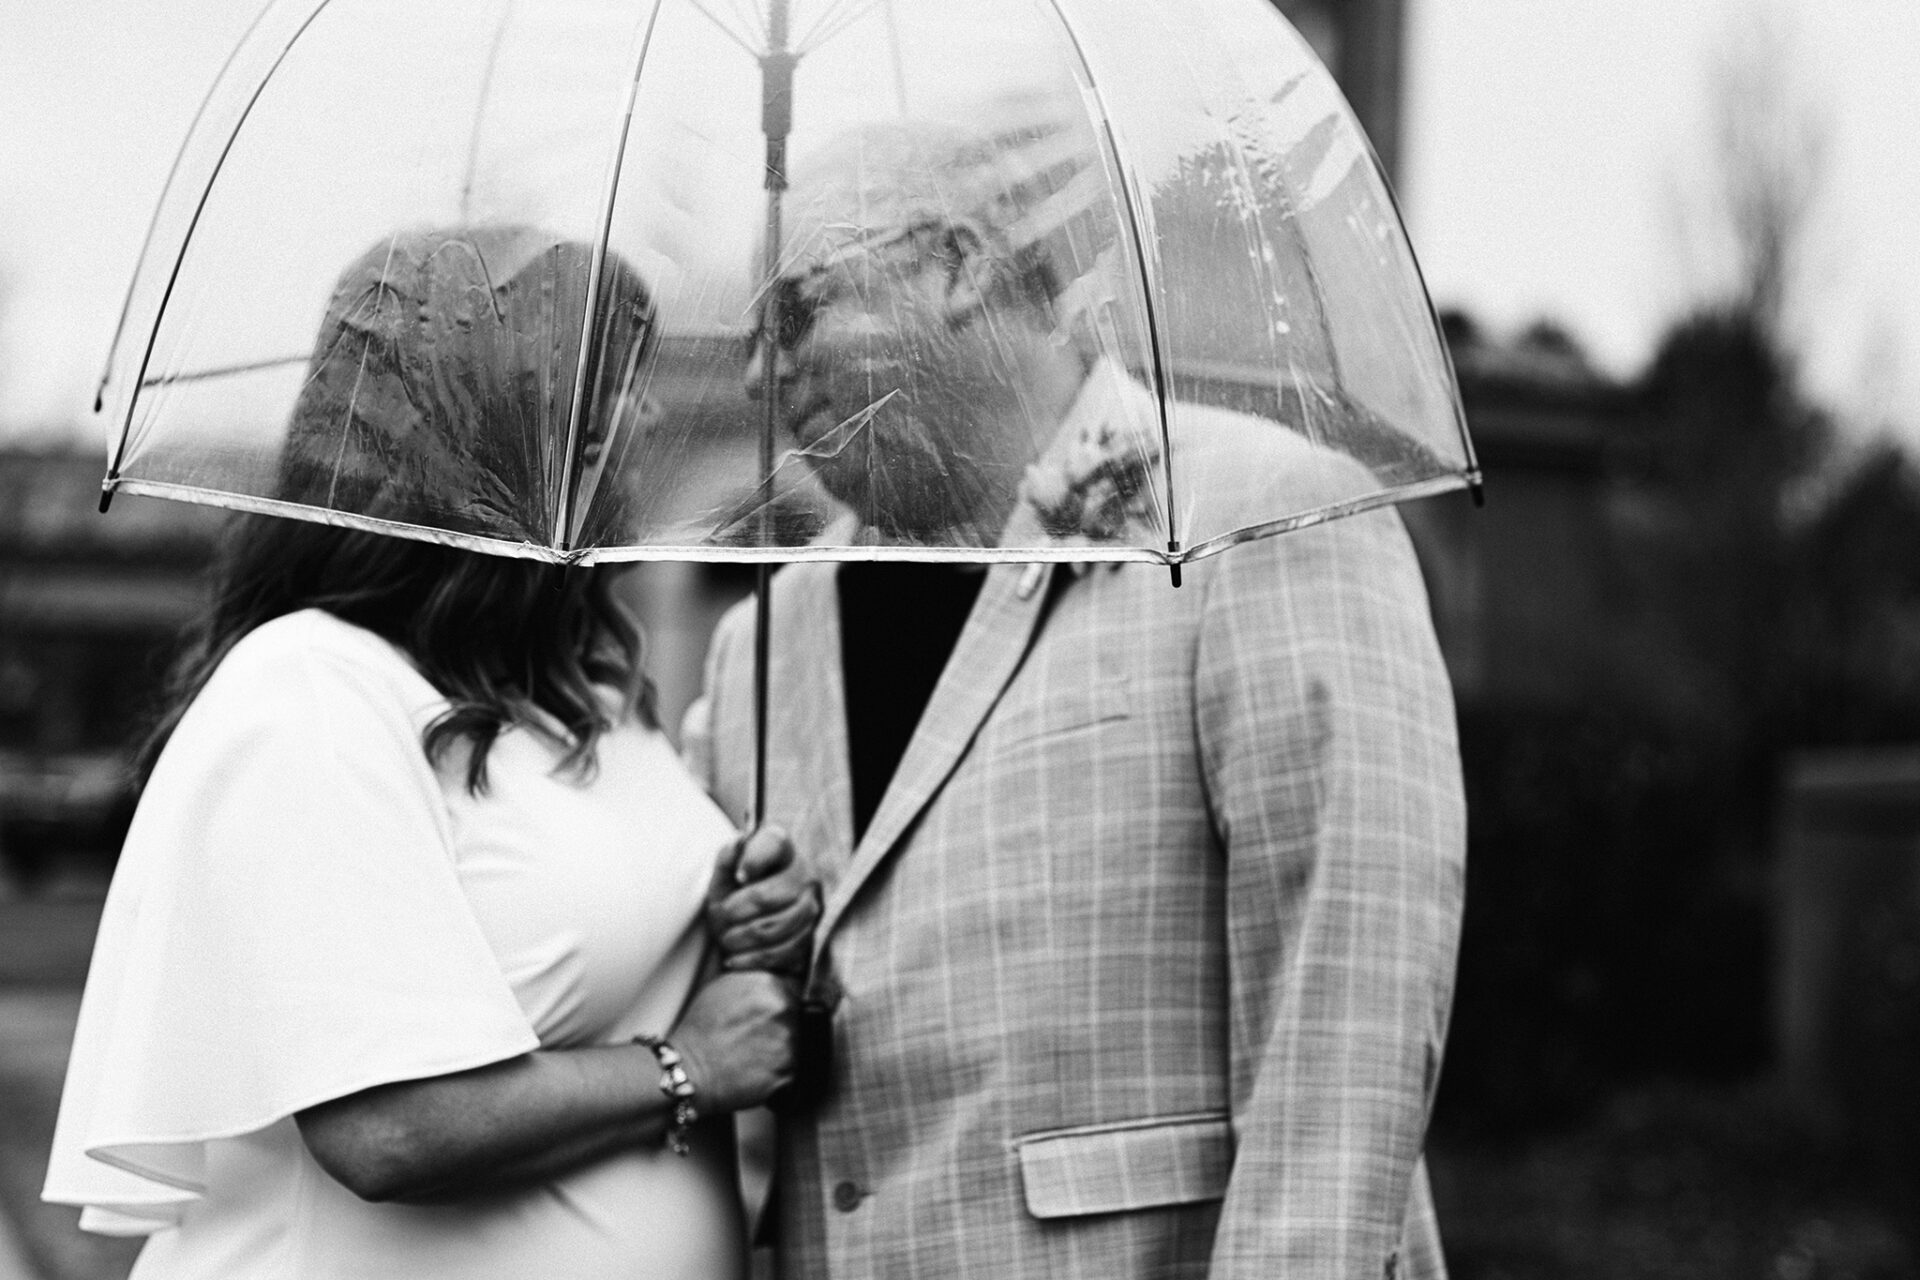 Wedding portrait in black and white under an umbrella by Chrissy Ray – Photographer in the Treasure Valley